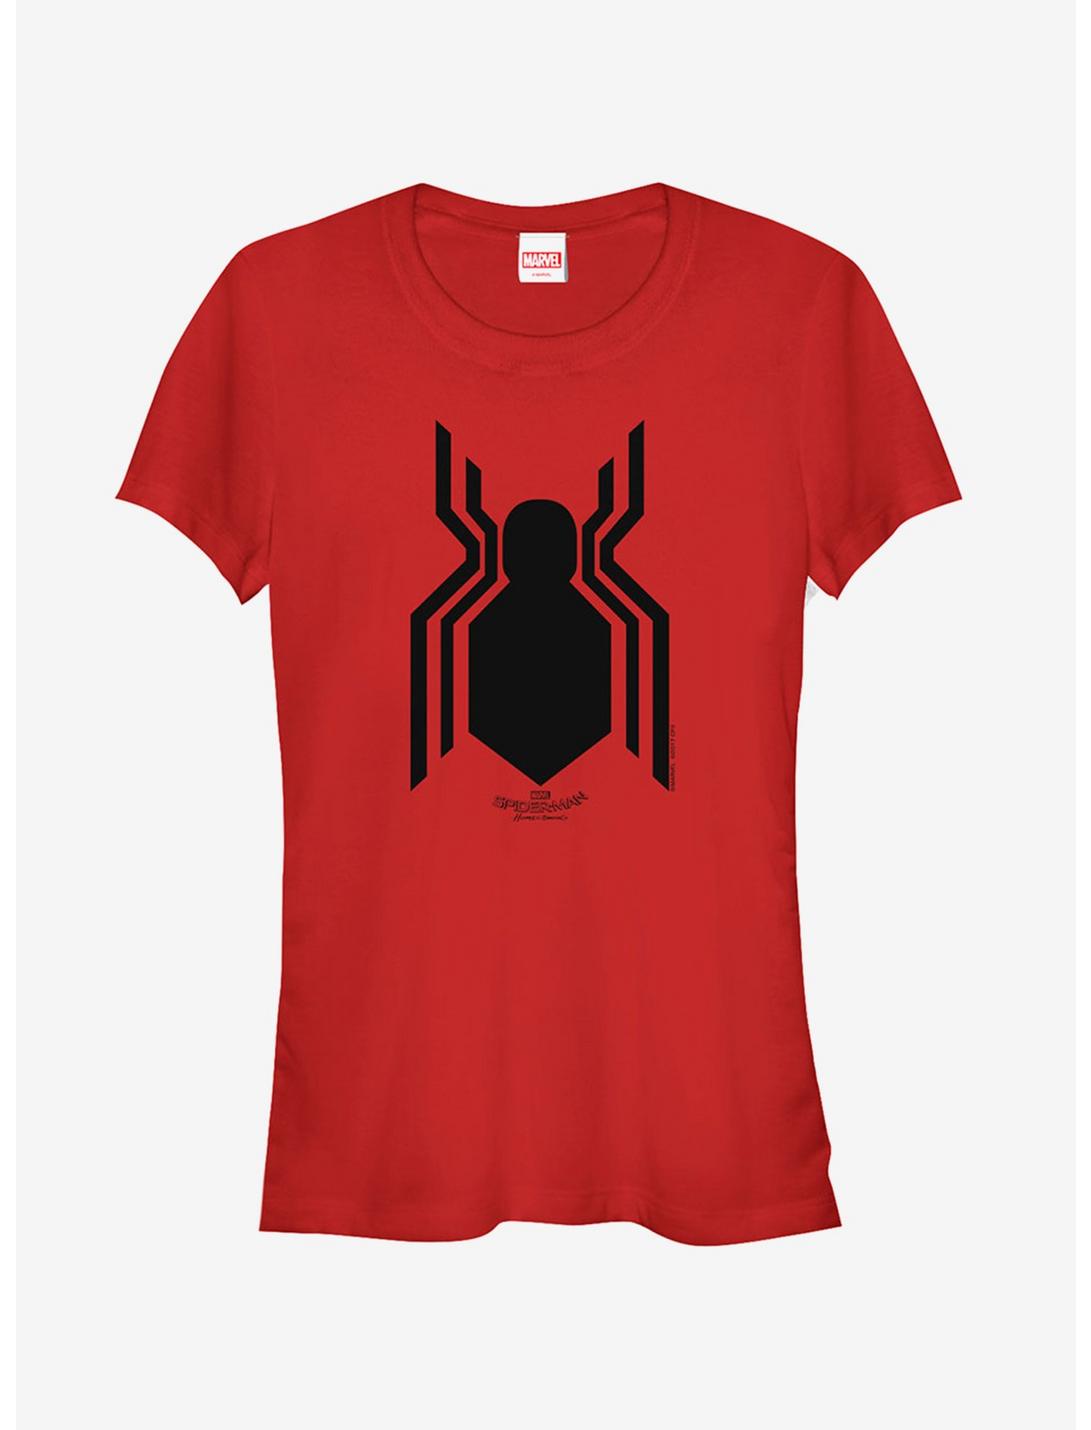 Marvel Spider-Man Homecoming Classic Logo Girls T-Shirt, RED, hi-res